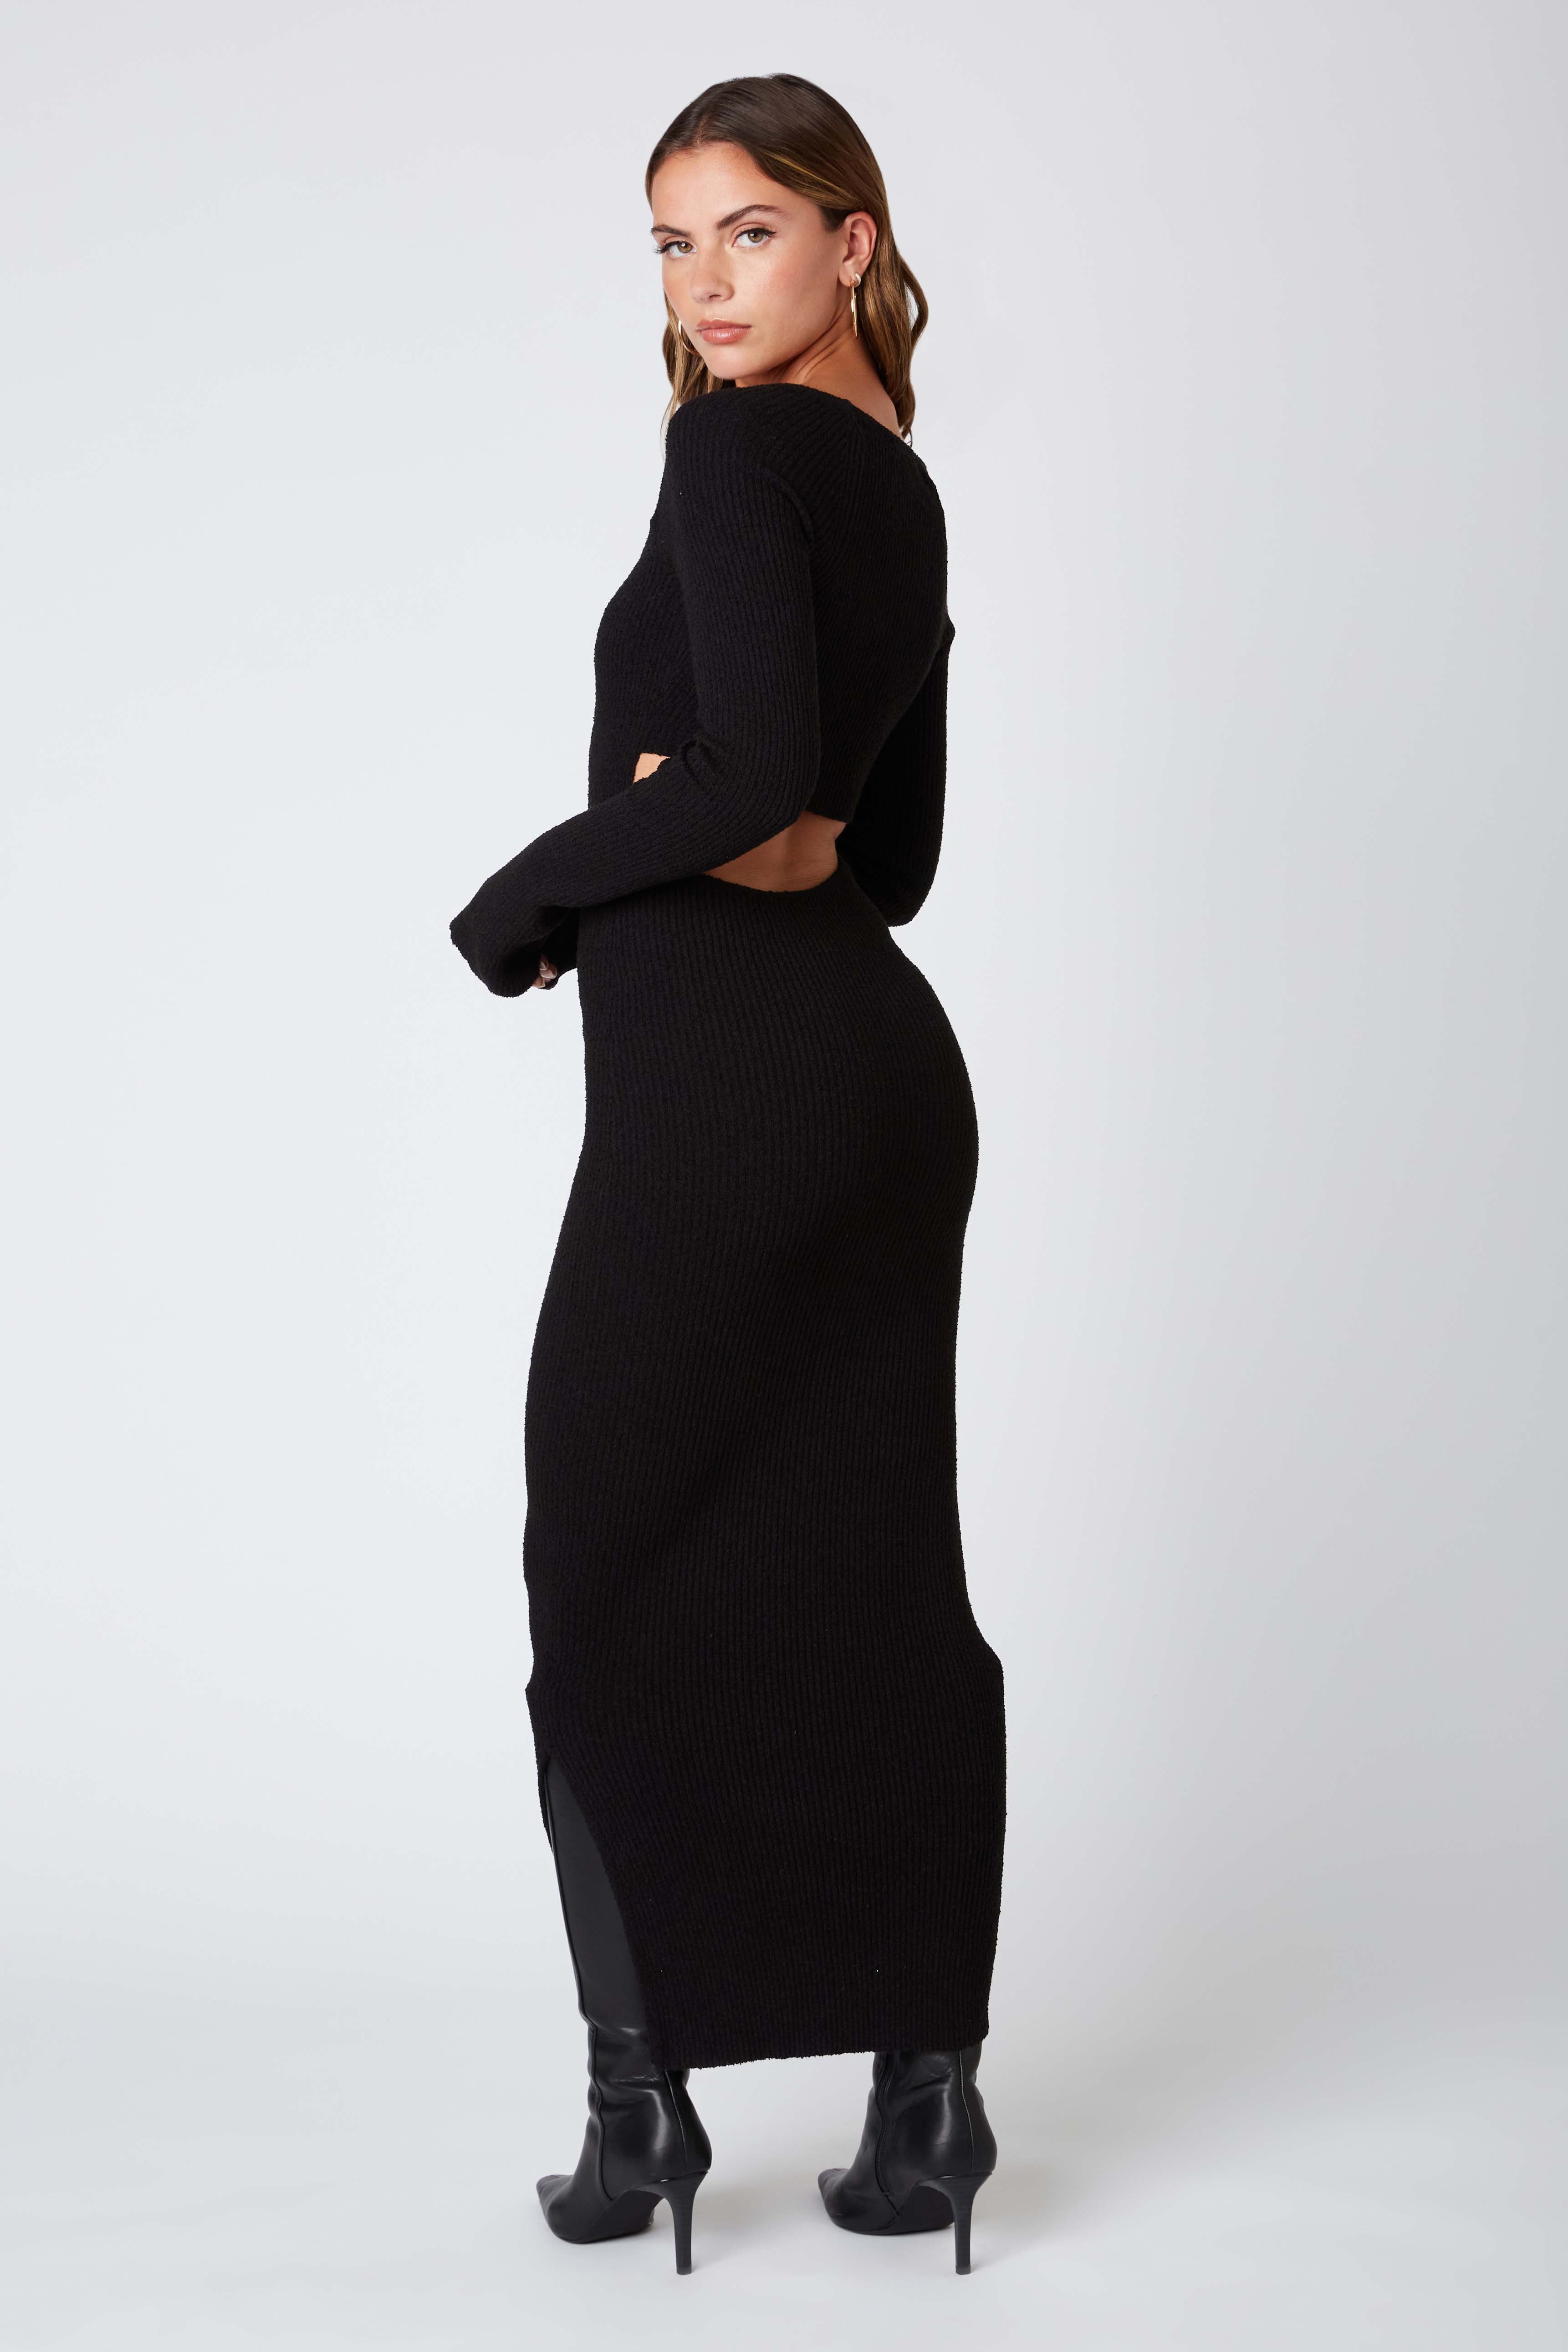 Knit Long Sleeve Maxi Dress in Black Back View